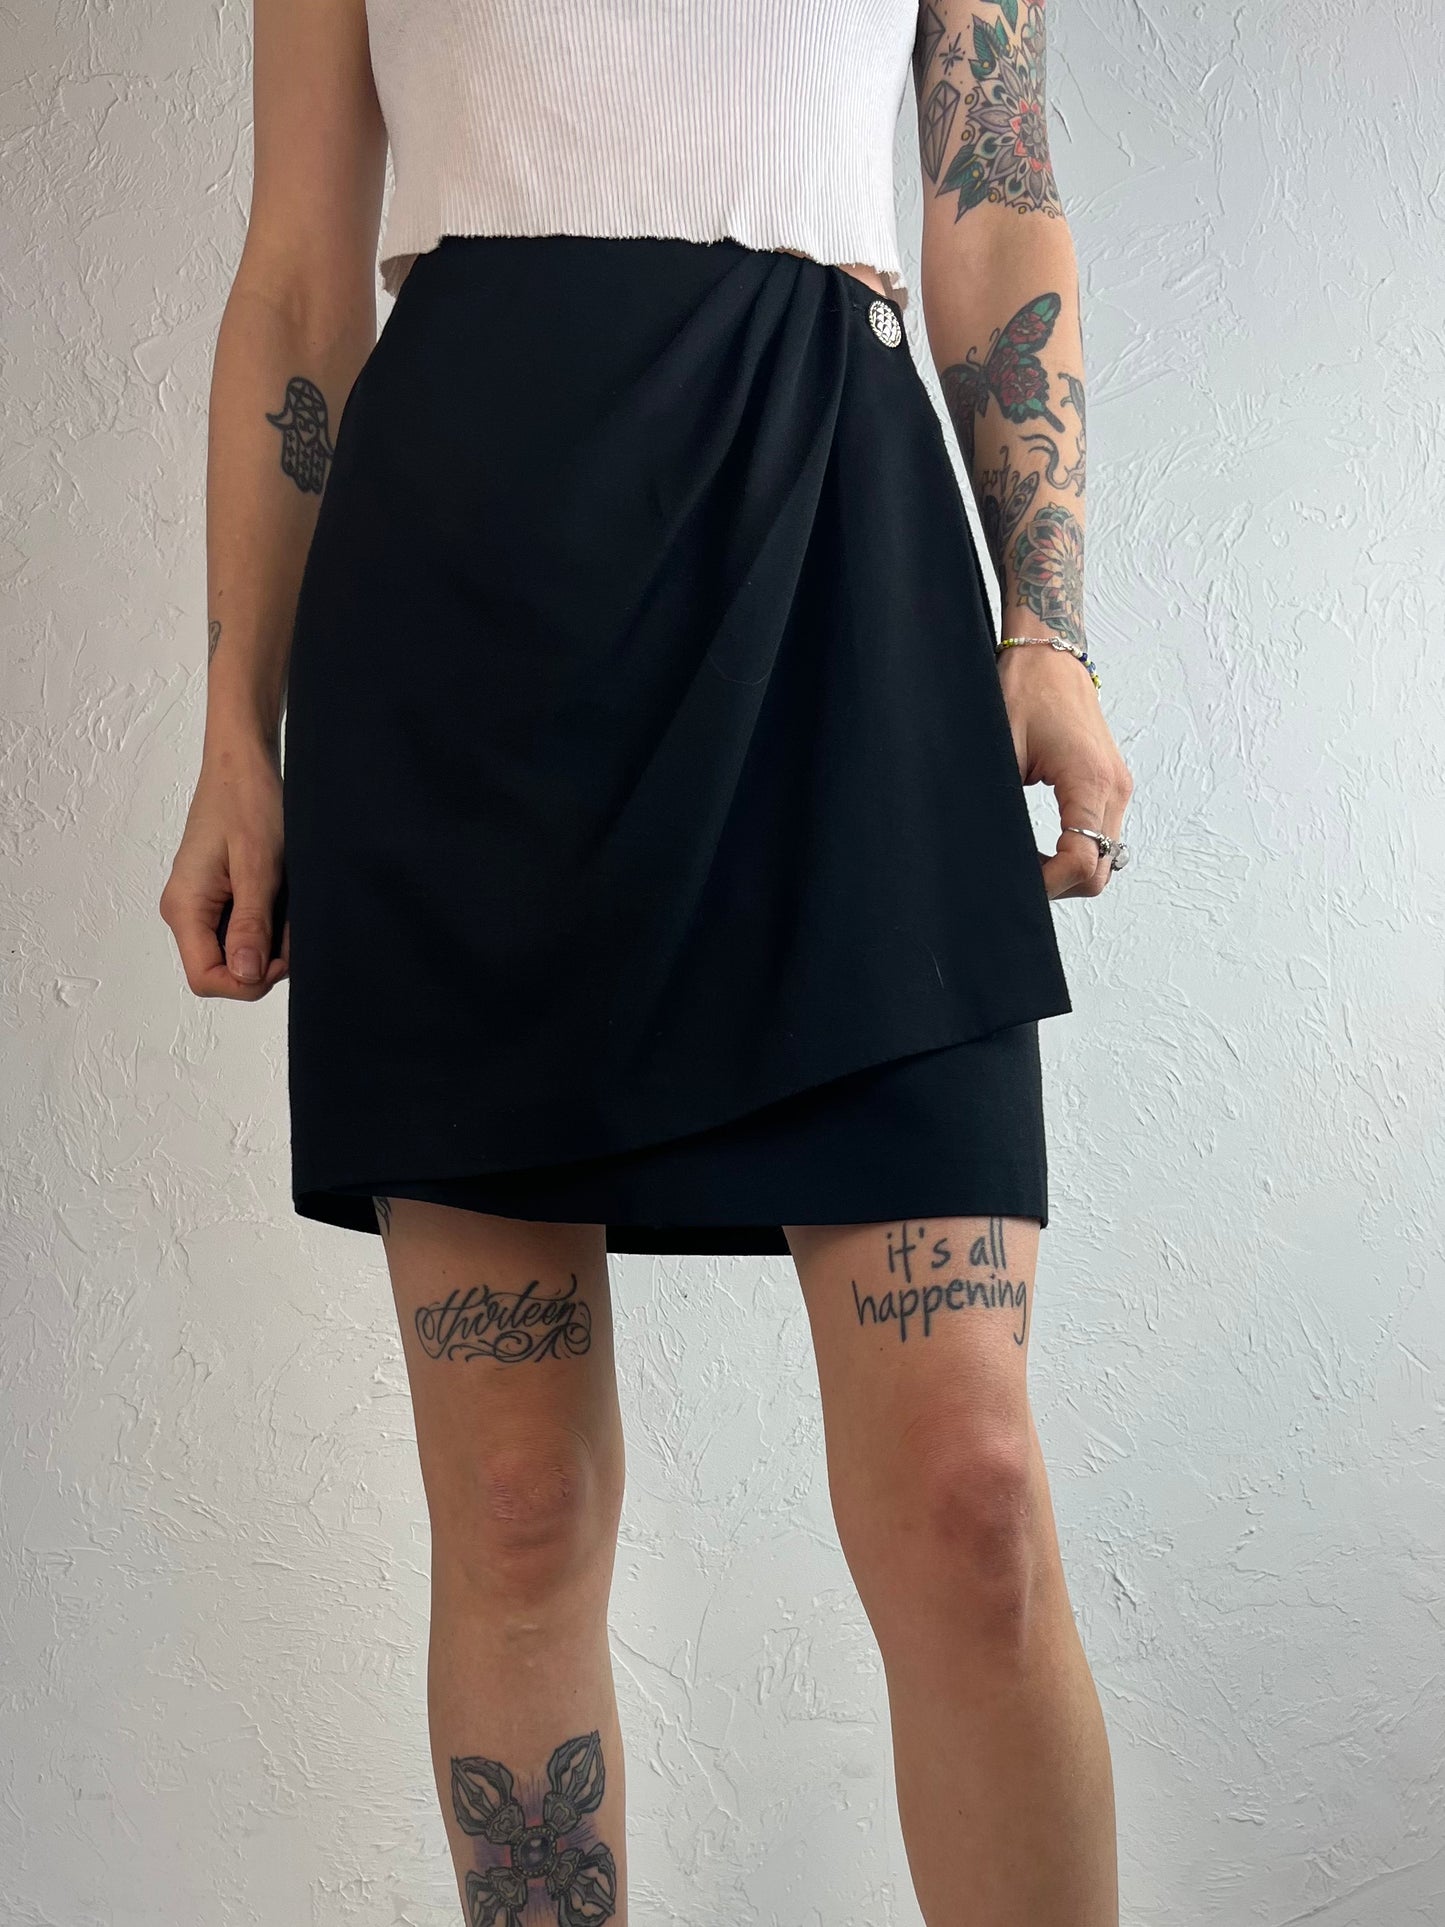 90s 'Collection' Black Mini Wrap Skirt / Small